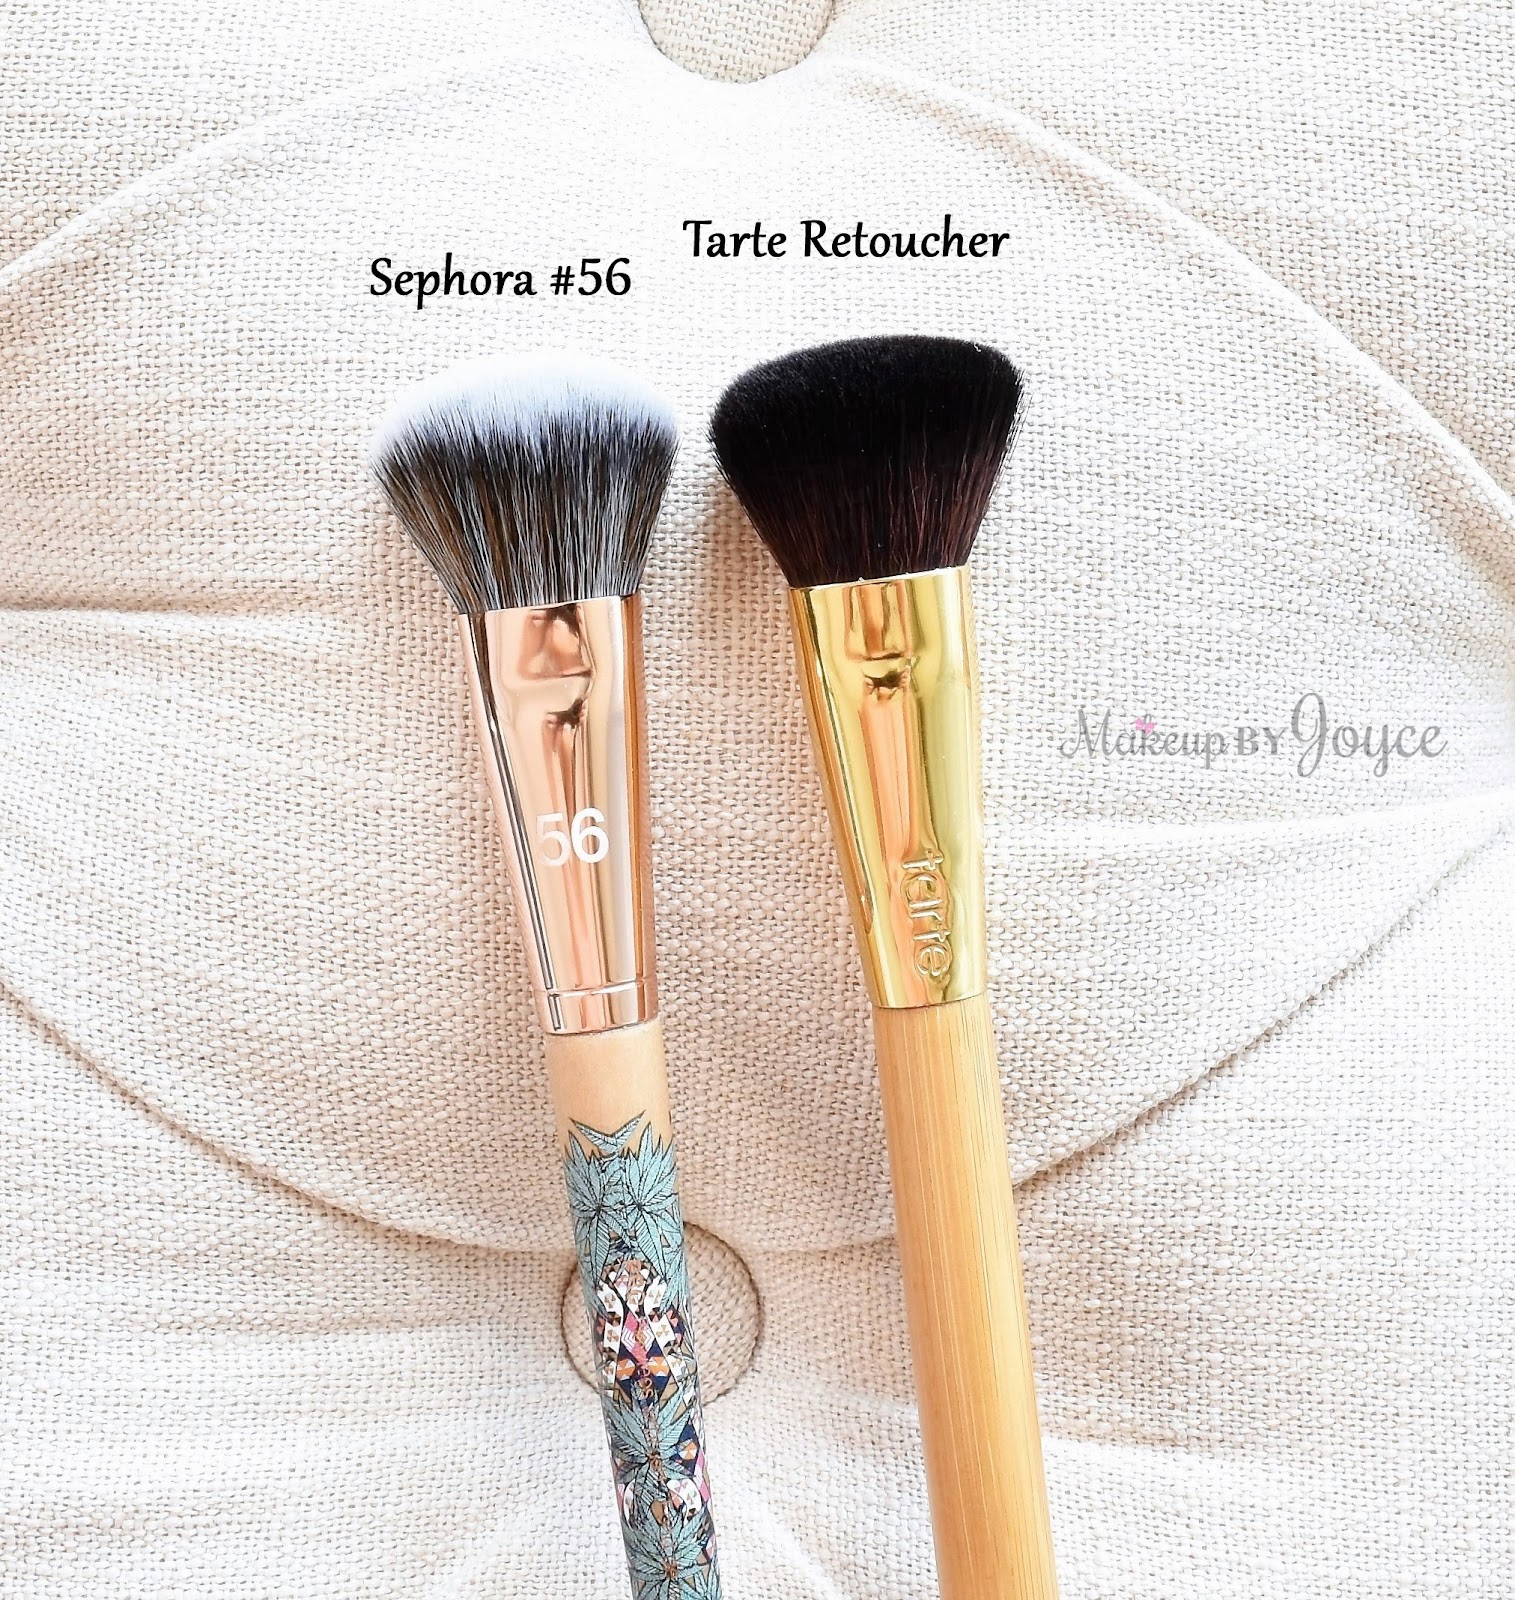 ❤ MakeupByJoyce ❤** !: Review: ELF Cosmetics Selfie Ready and the Ultimate Blending  Brush